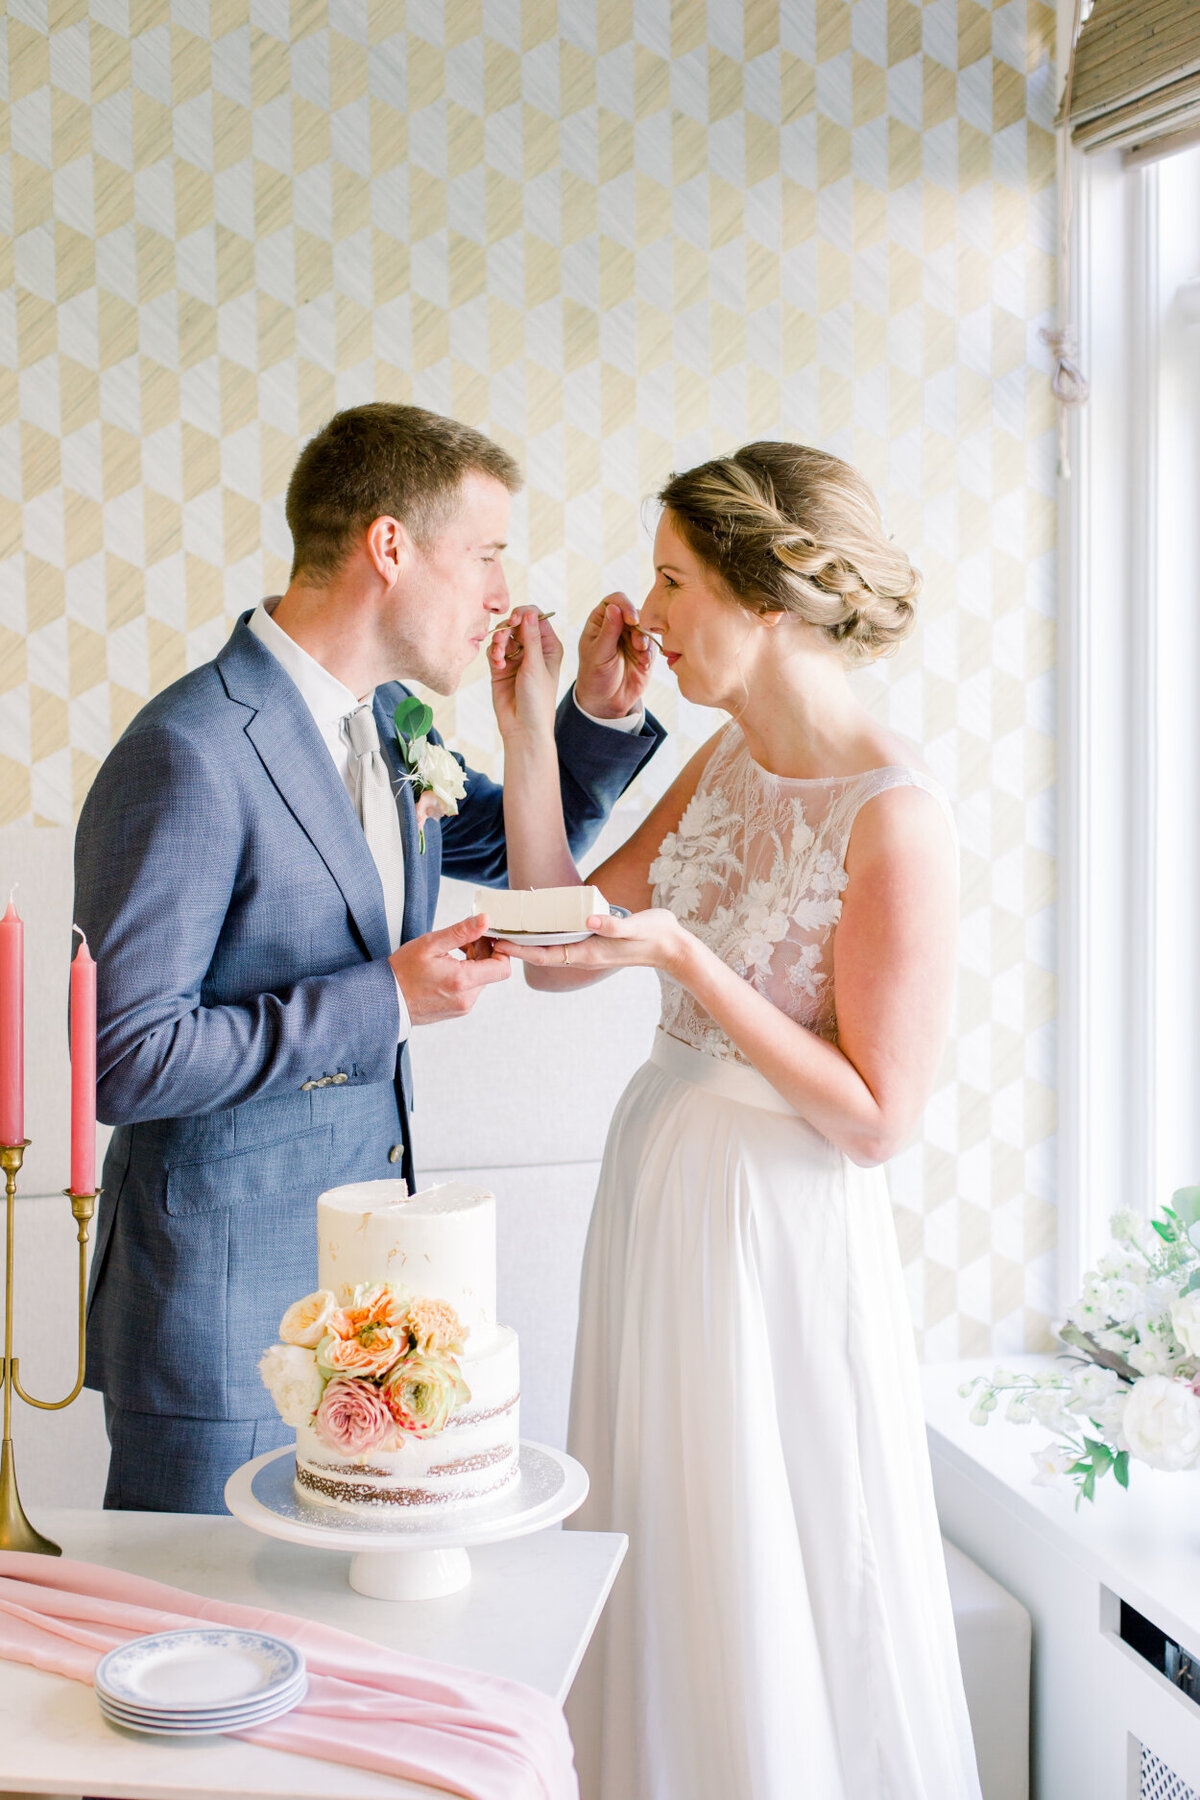 Bride and groom take the first bite of their small wedding cake for an intimate wedding photoshoot at the Tassenmuseum organized by Lovely & Planned